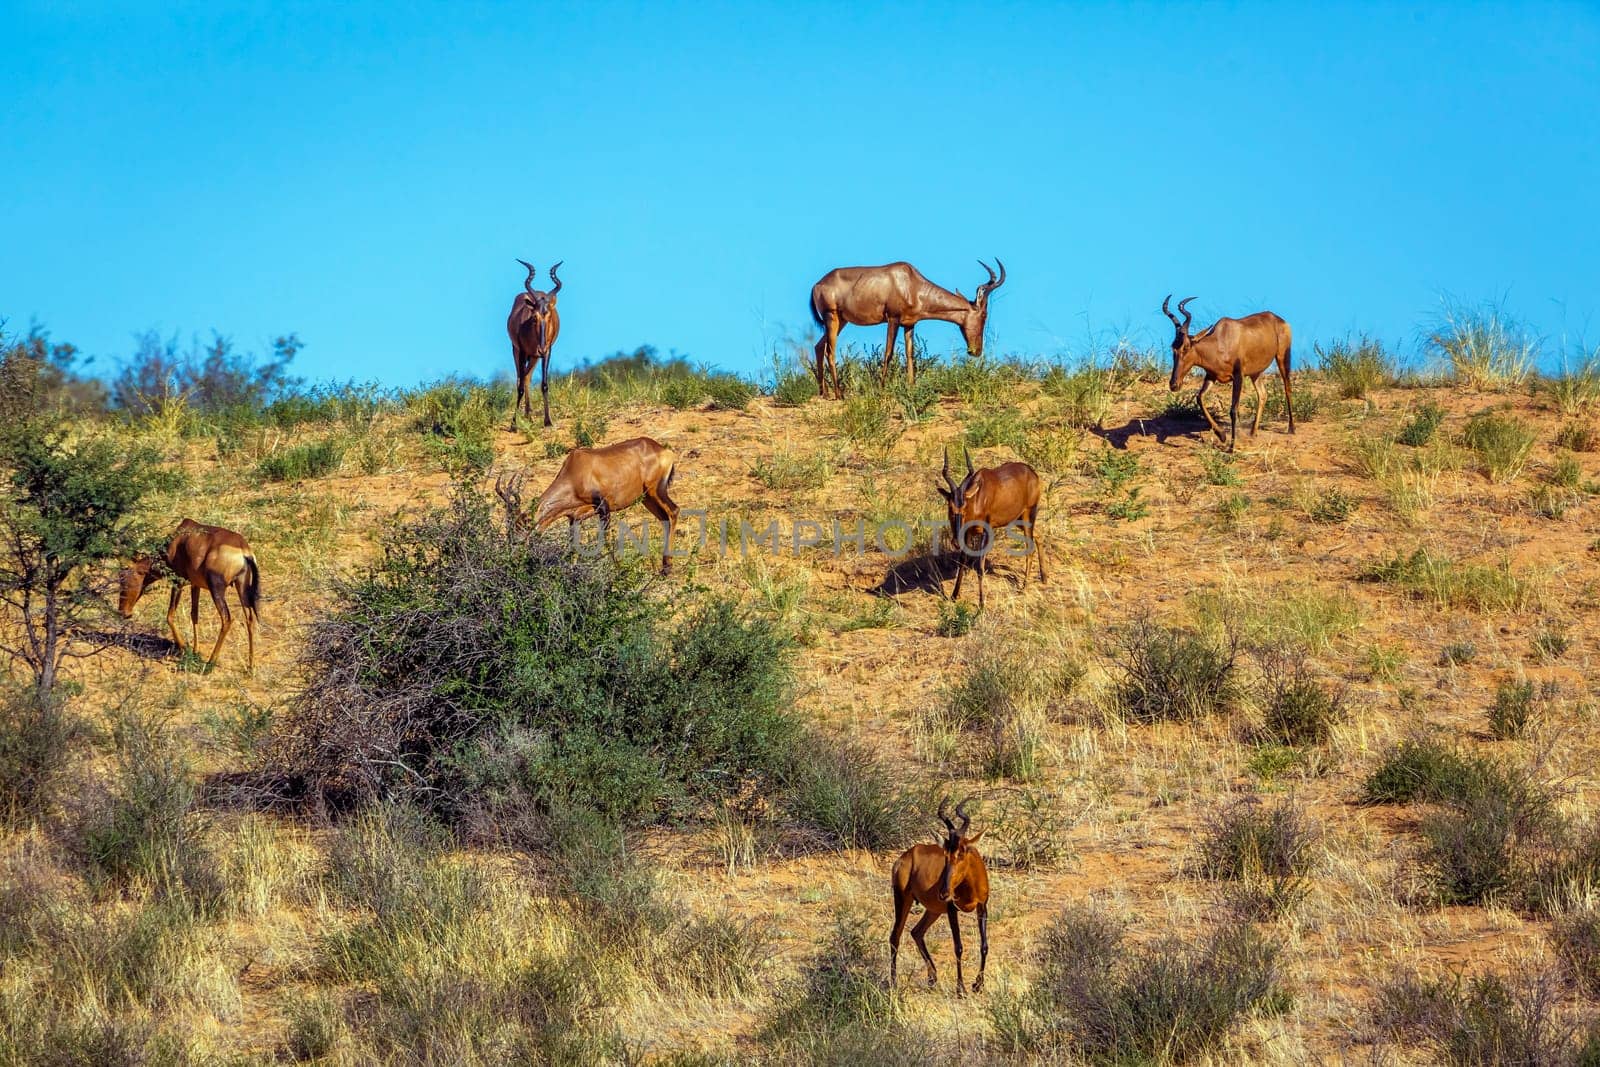 Small group of Hartebeest grazing in sand dune in Kgalagadi transfrontier park, South Africa; specie Alcelaphus buselaphus family of Bovidae